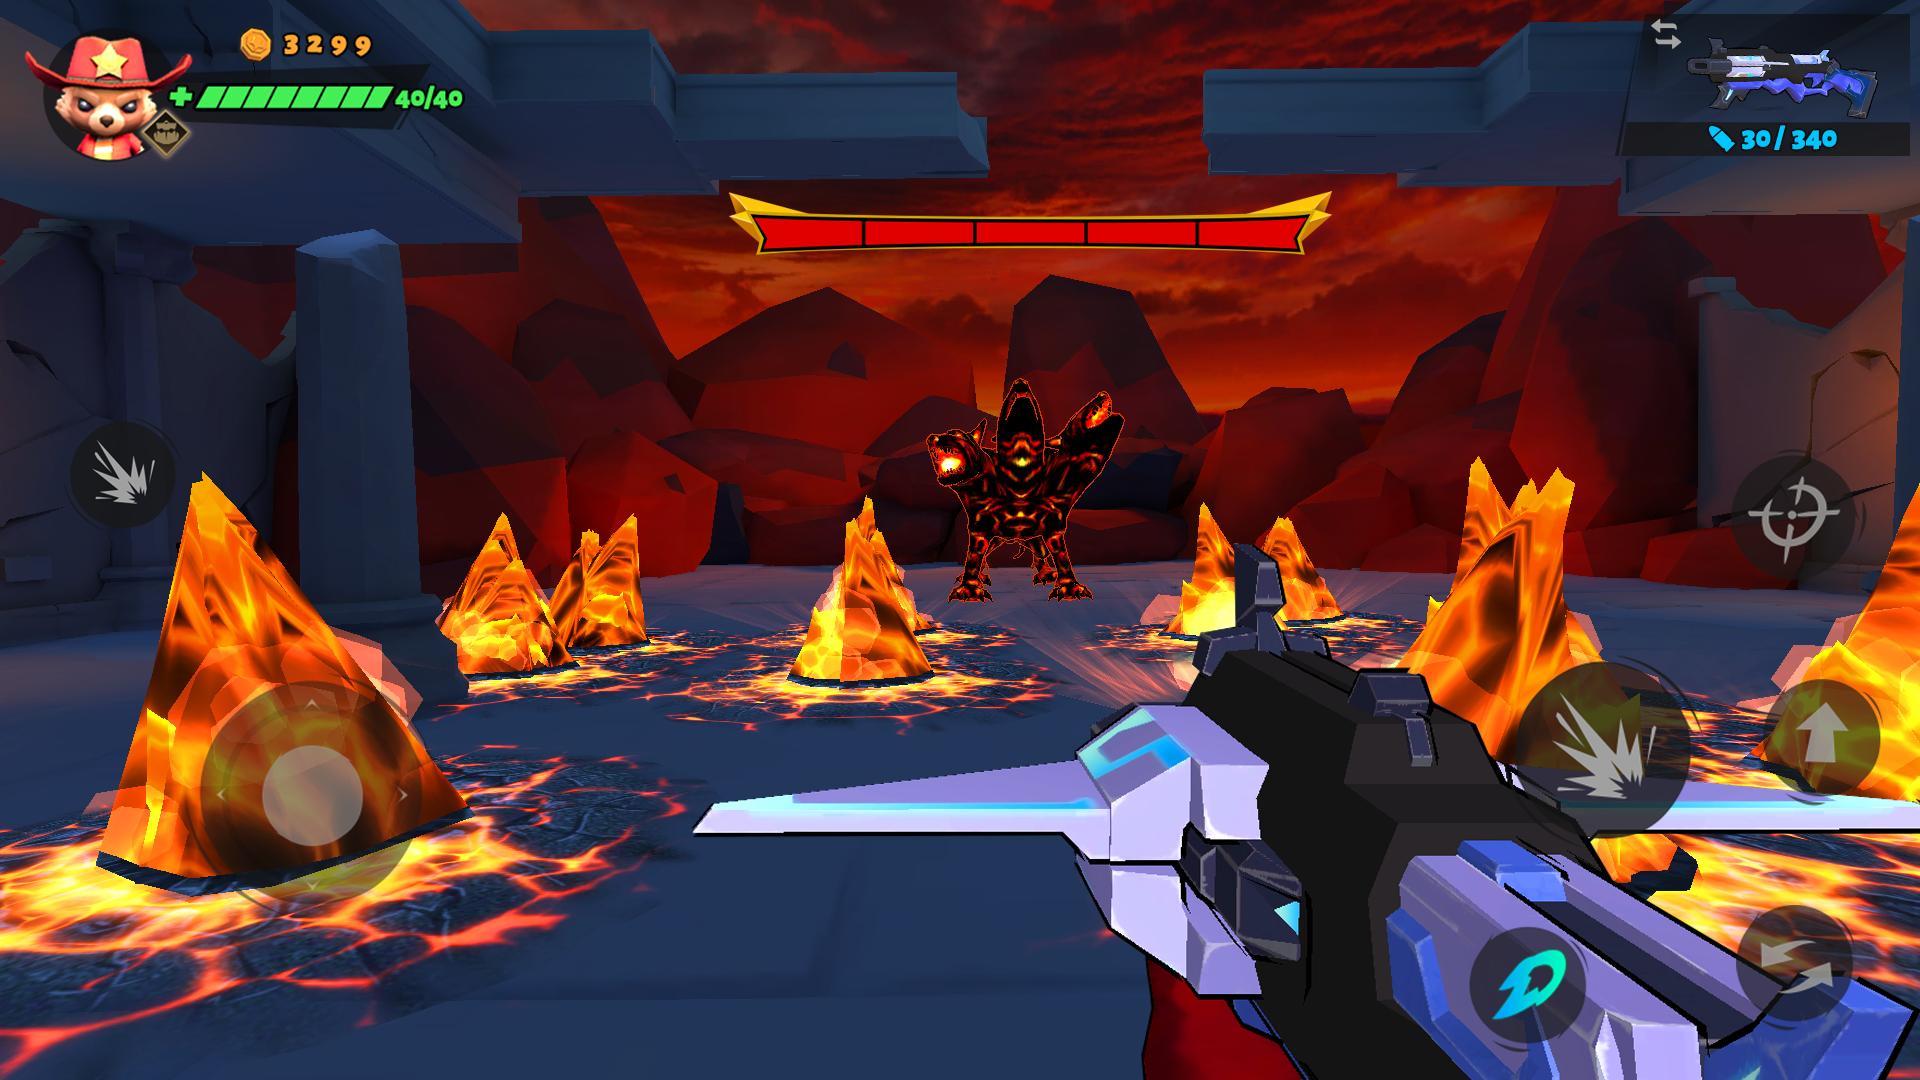 Gunfire : Endless Adventure for Android - APK Download